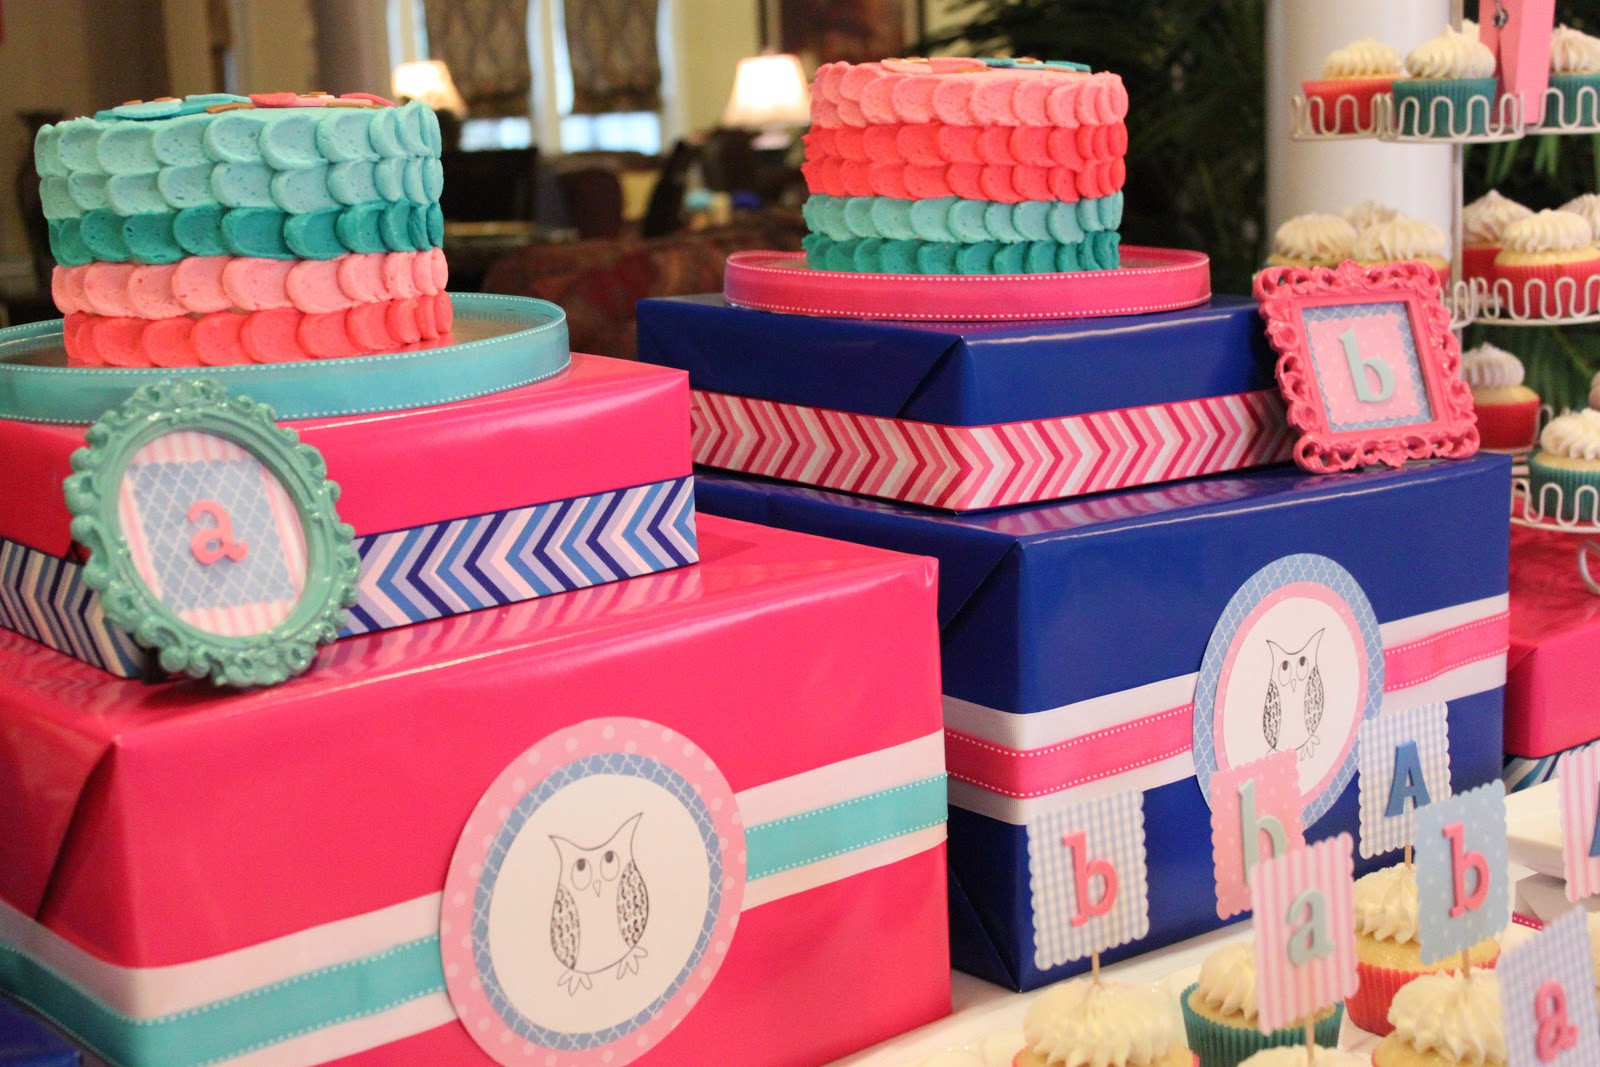 Baby Gender Reveal Party Ideas For Twins
 Crave Indulge Satisfy Look Whoo s Having Two Twins